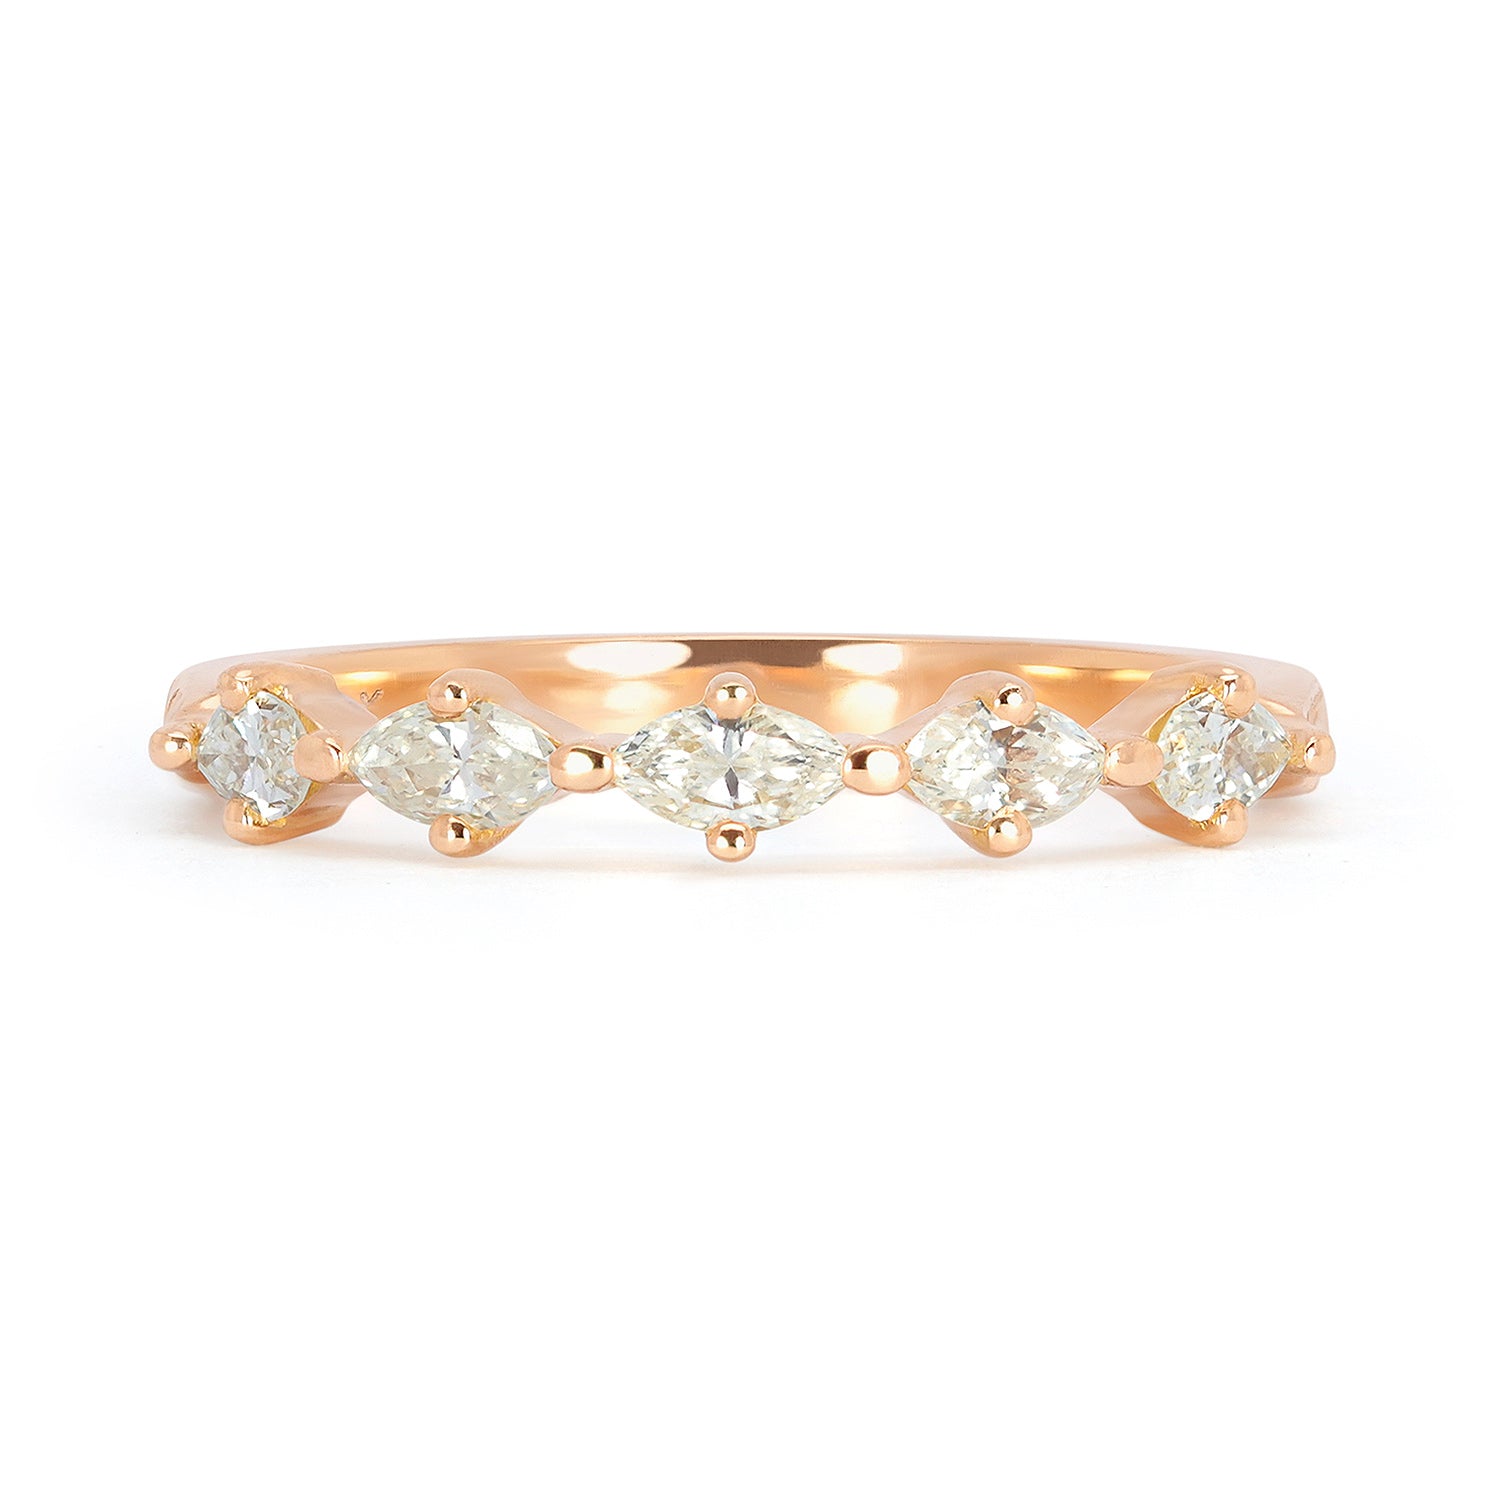 Bespoke 18ct recycled rose gold slim wedding band, claw-set with five inherited marquise diamonds and hand-engraved with scrolls, top view